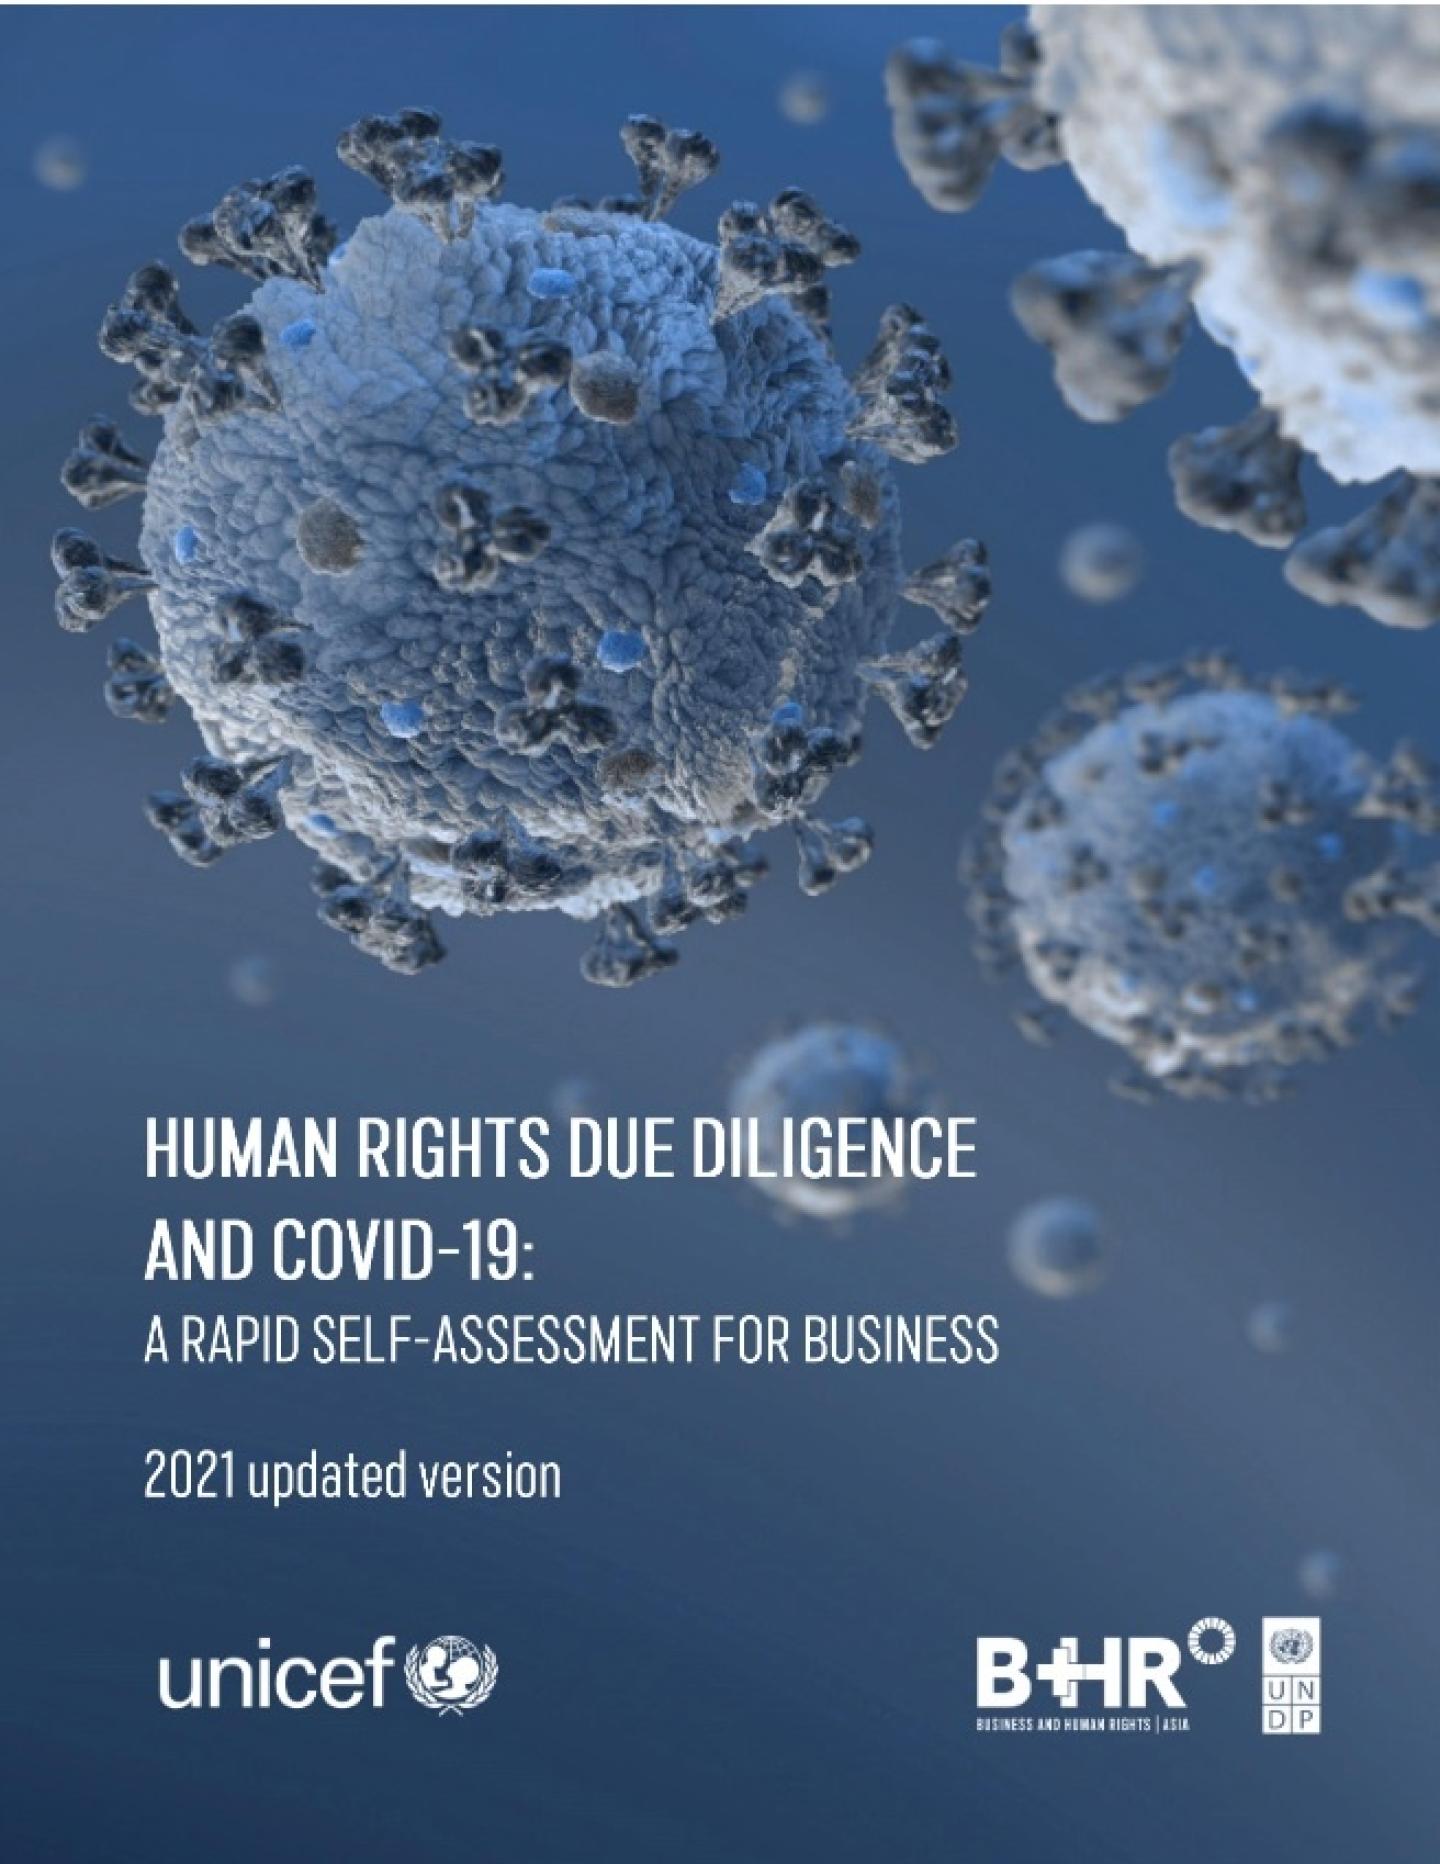 https://www.undp.org/sites/g/files/zskgke326/files/styles/scaled_image_large/public/publications/UNDP-RBAP-2020-Human-Rights-Due-Diligence-and-COVID-19-Update-2021-cover.jpg?itok=tHUhsh1y